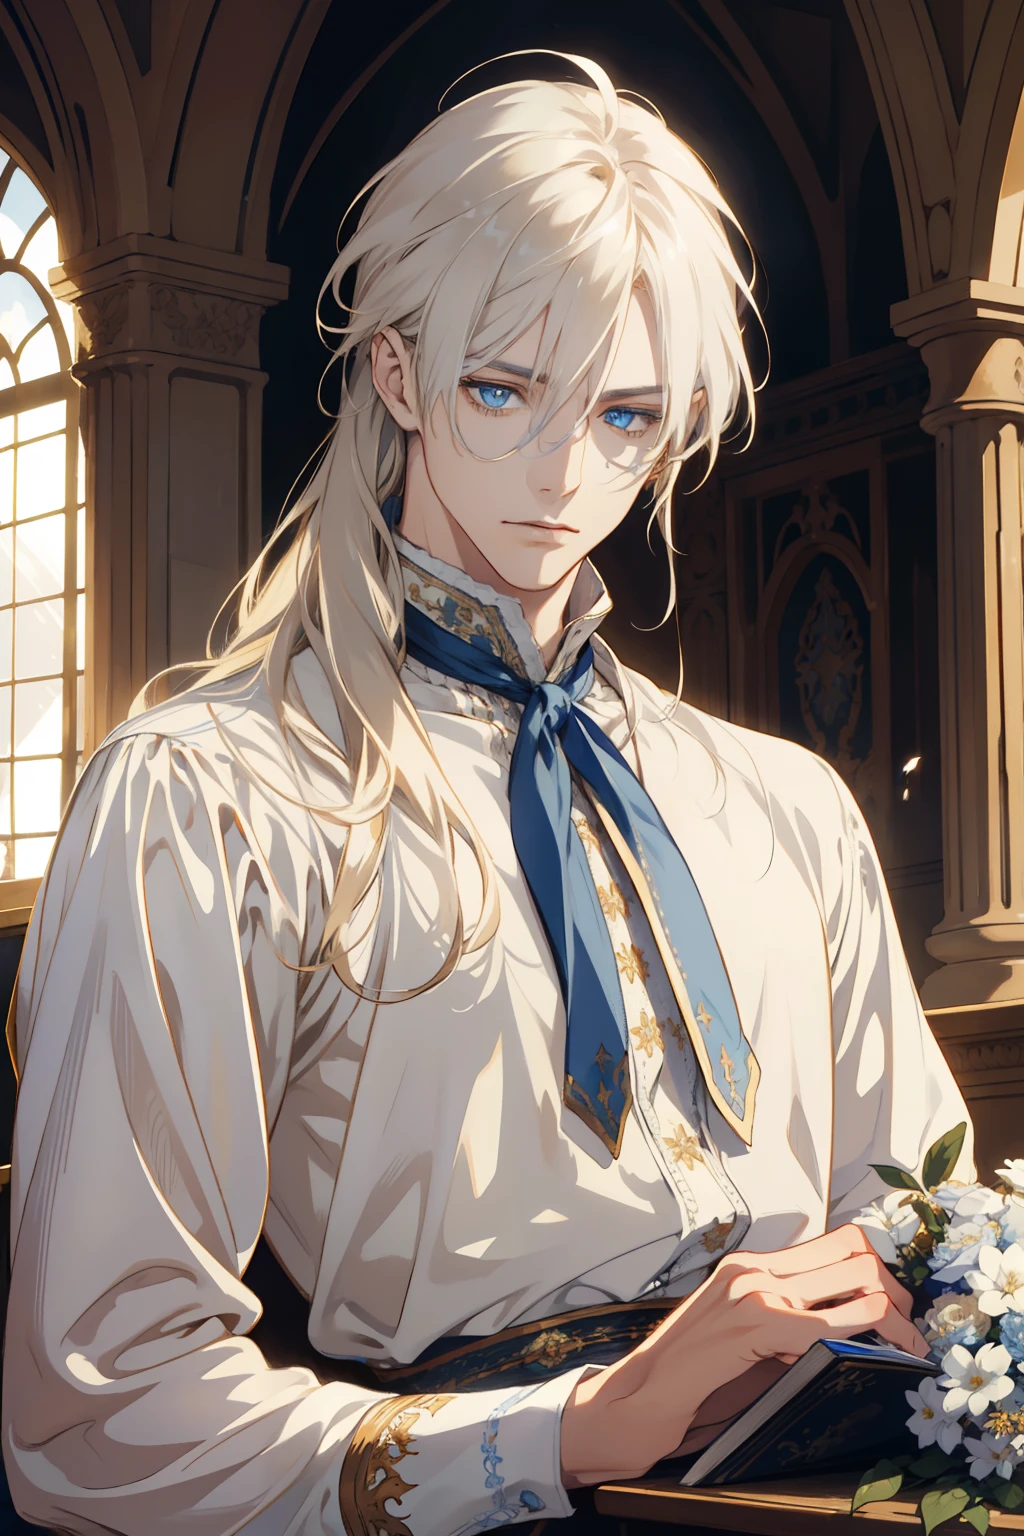 1 Boy, Realistic, master-piece, bestquality, Beautiful, detailed eyes and detailed faces.,natural light, Medieval Fantasy, European retro, White shirt, Long golden hair, blue eyes, attractive, depressed, Decorative flowers, sunbeam, innocent, read